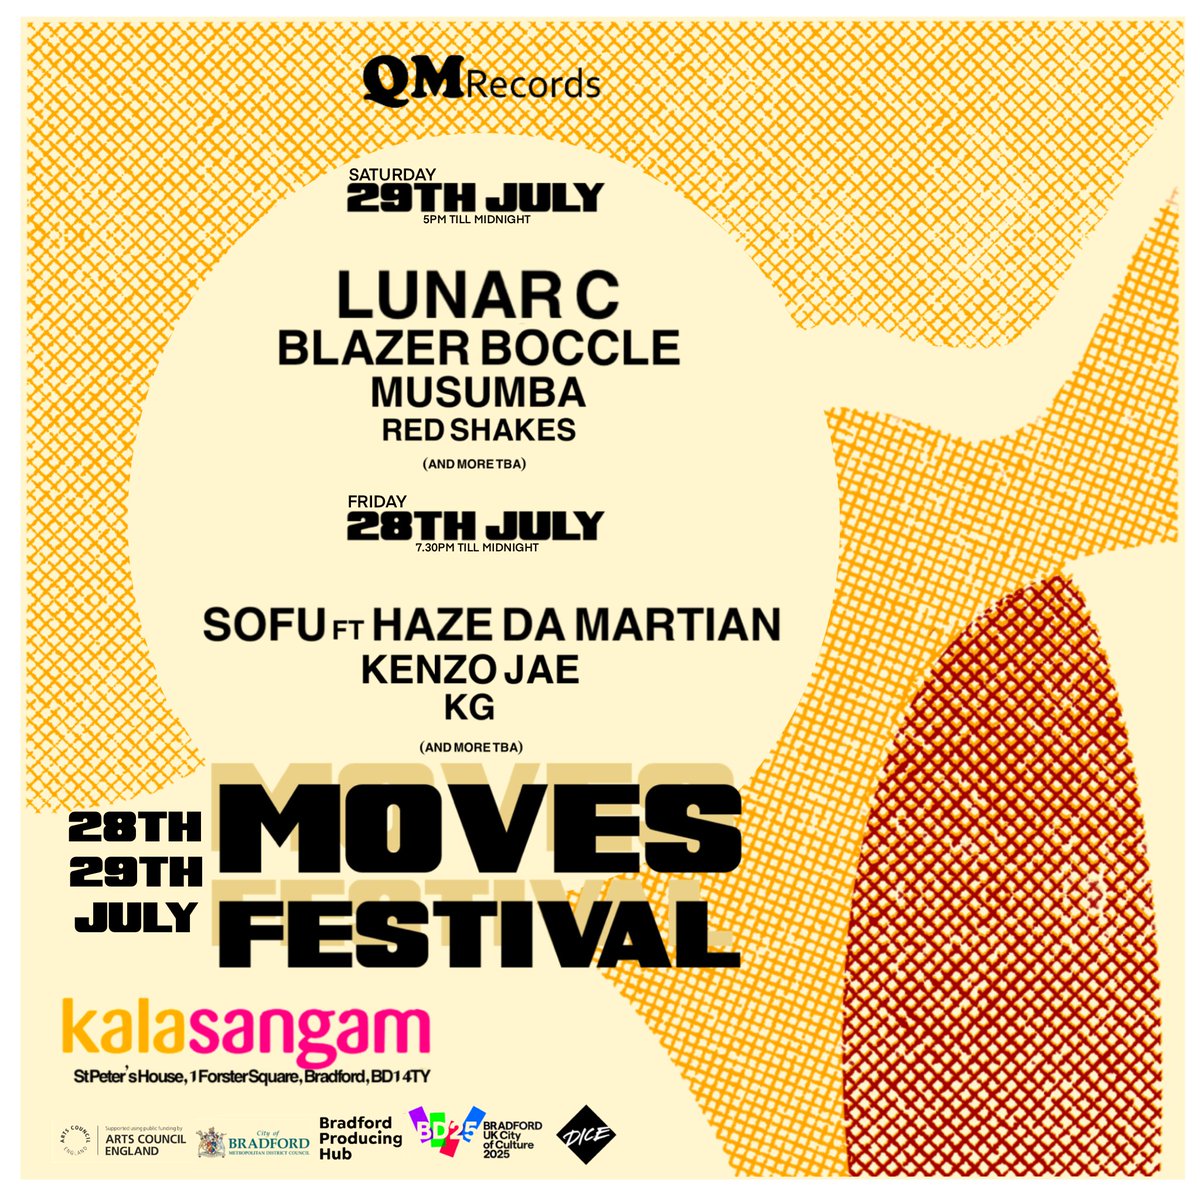 We can’t wait for MOVES bfd. We’ve put together an absolute star studded lineup. ‘MOVES’ festival | 28th/29th July | Bradford-Kala Sangam arts centre Lineup includes-@LunarCFT @HazeDaMartian @blazerboccle @redshakesmusic @musumba777 Get tickets link.dice.fm/V0de80ef78b7 #qmrecords